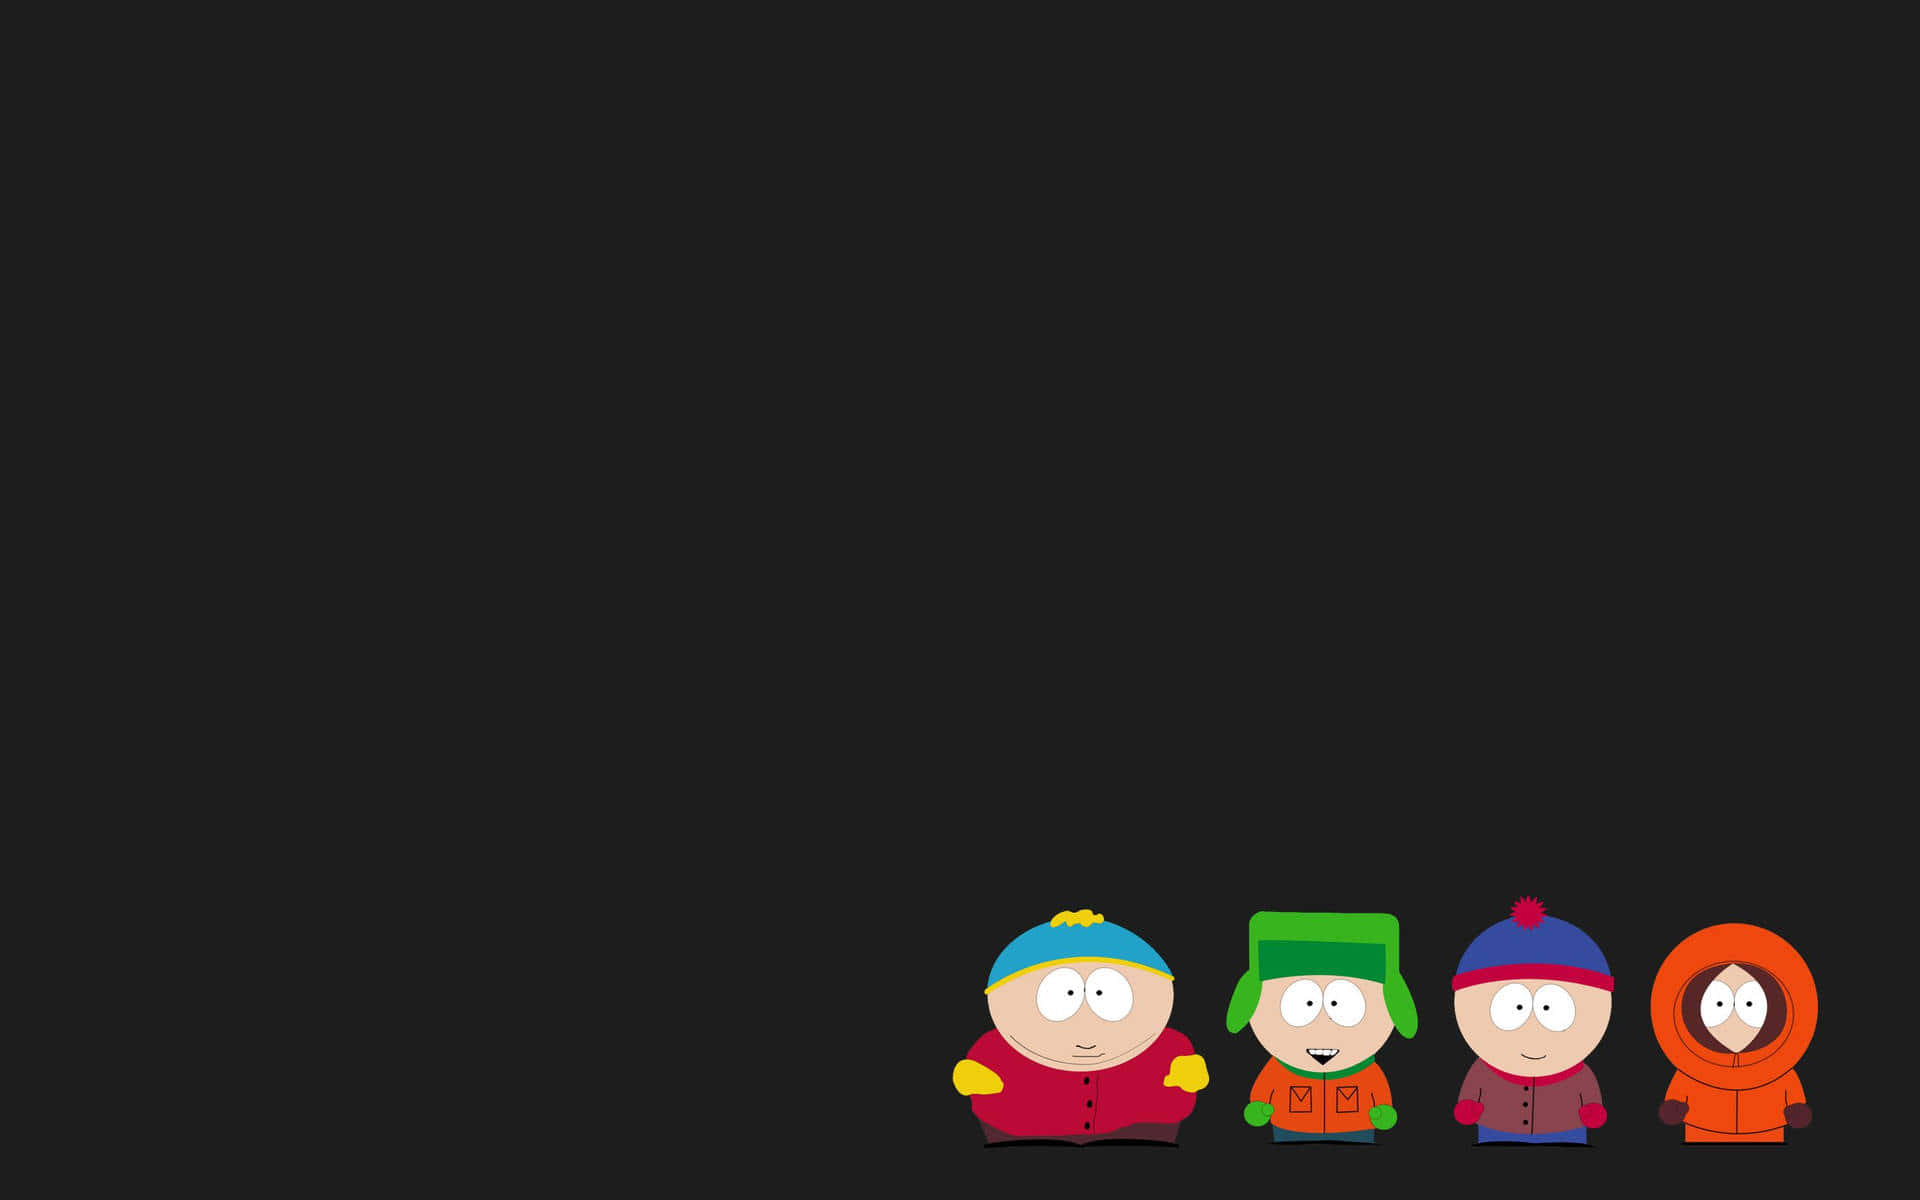 All your South Park favorites in one place!